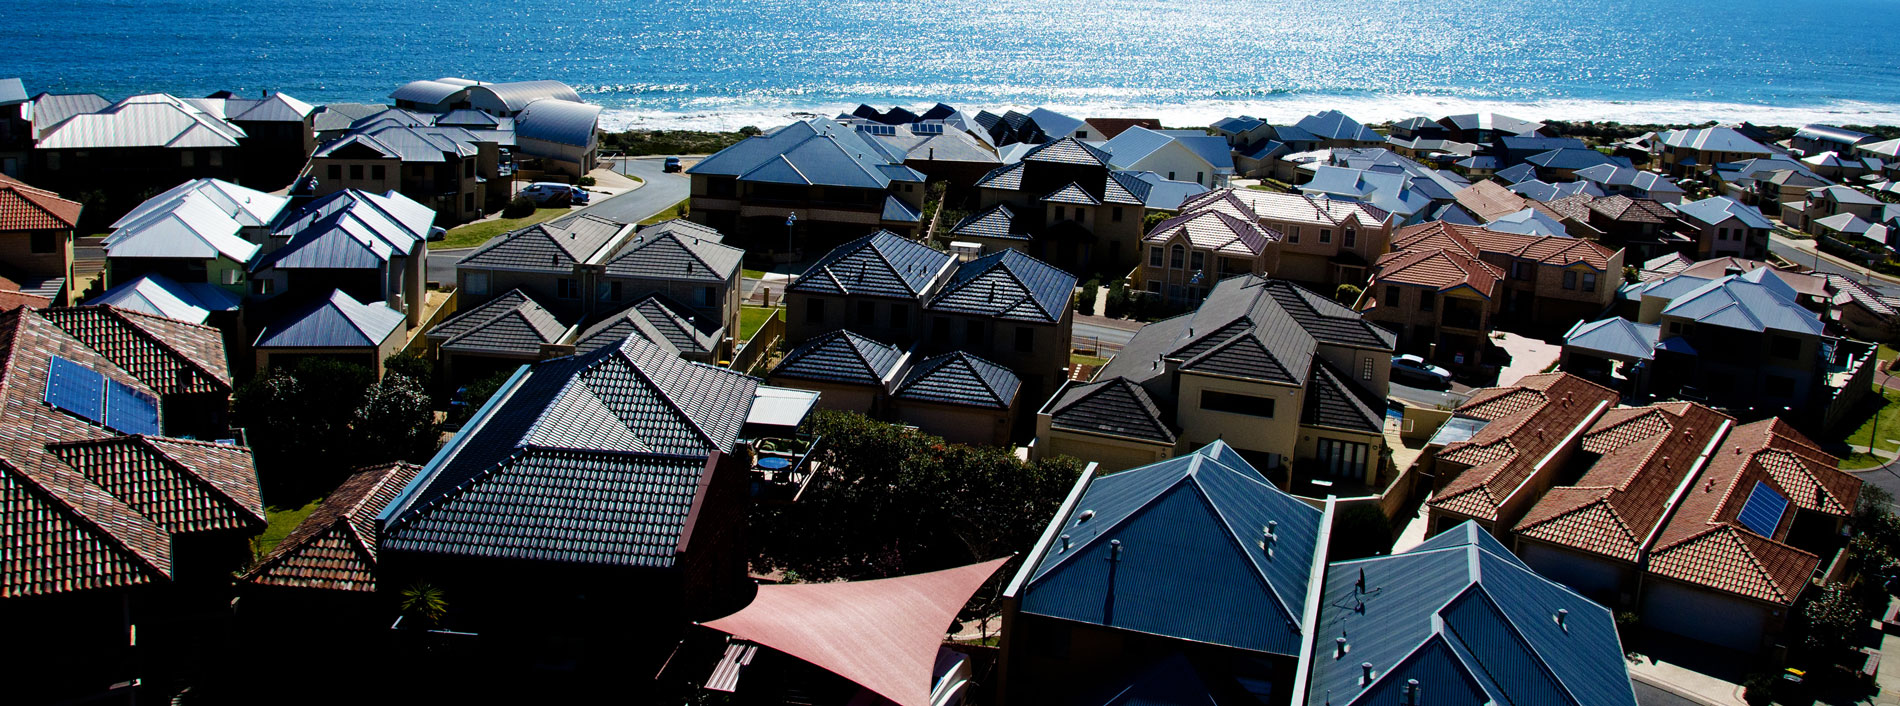 View looking over houses next to ocean